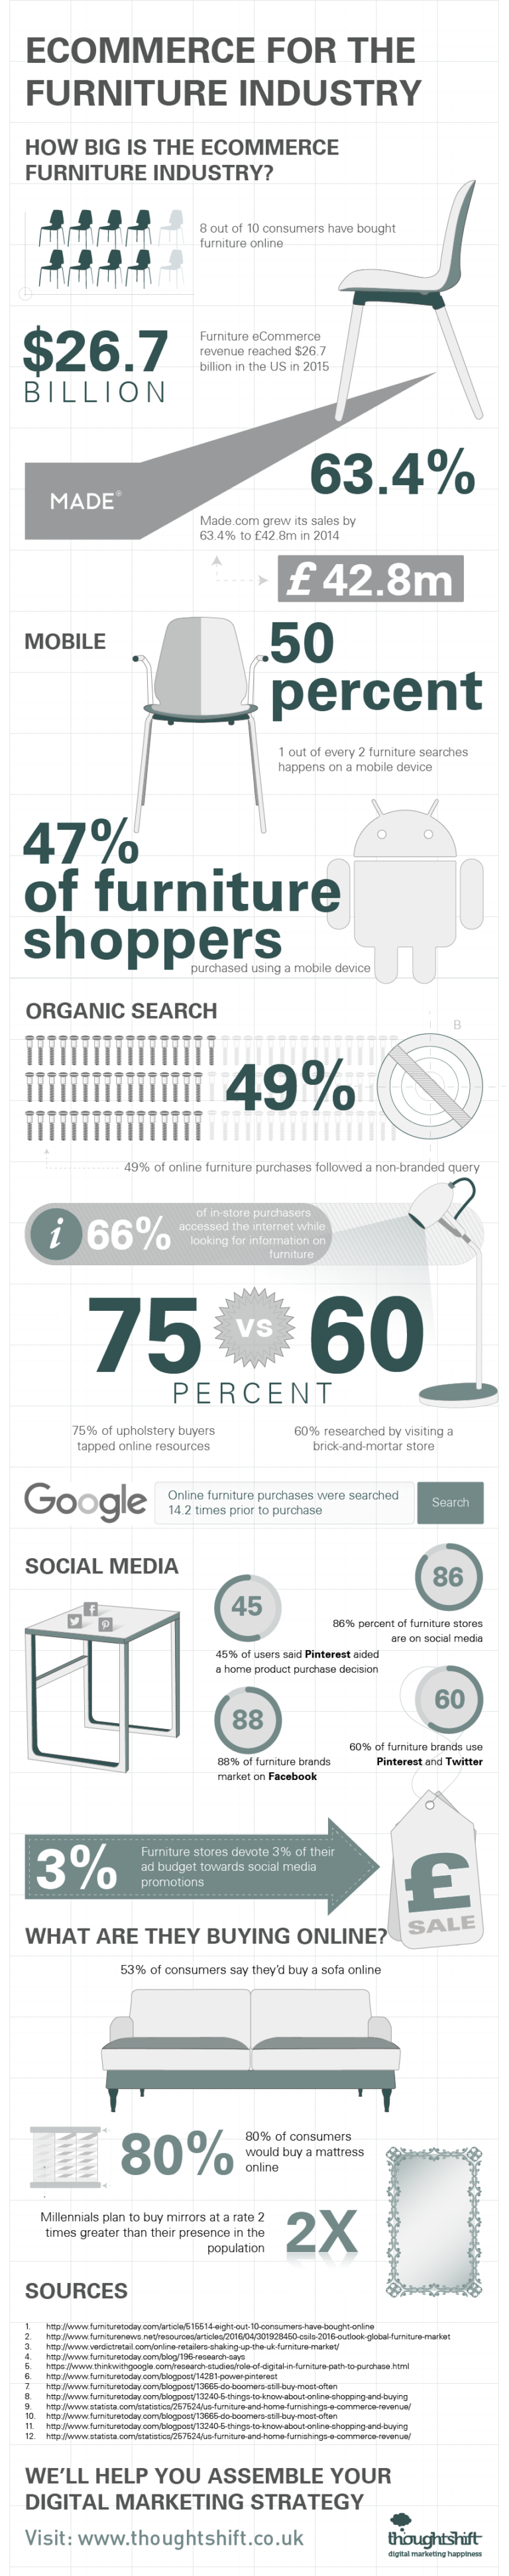 The eCommerce Furniture Statistics Infographic by ThoughtShift